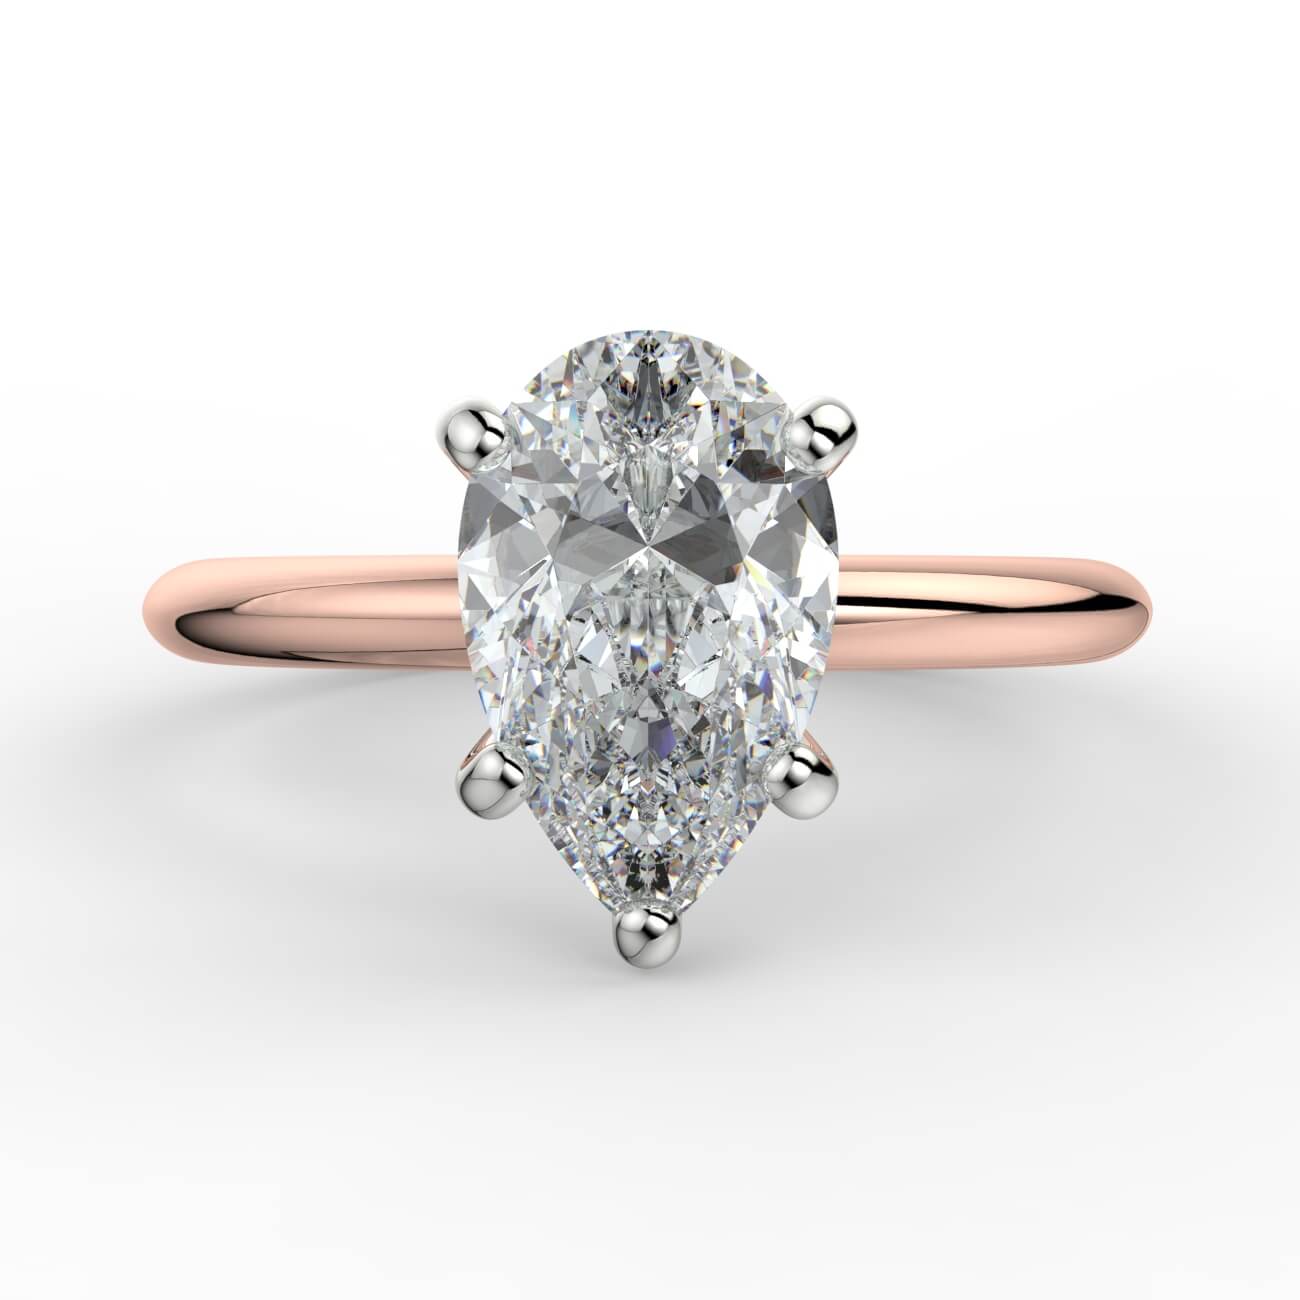 Solitaire pear shape diamond engagement ring in white and rose gold – Australian Diamond Network